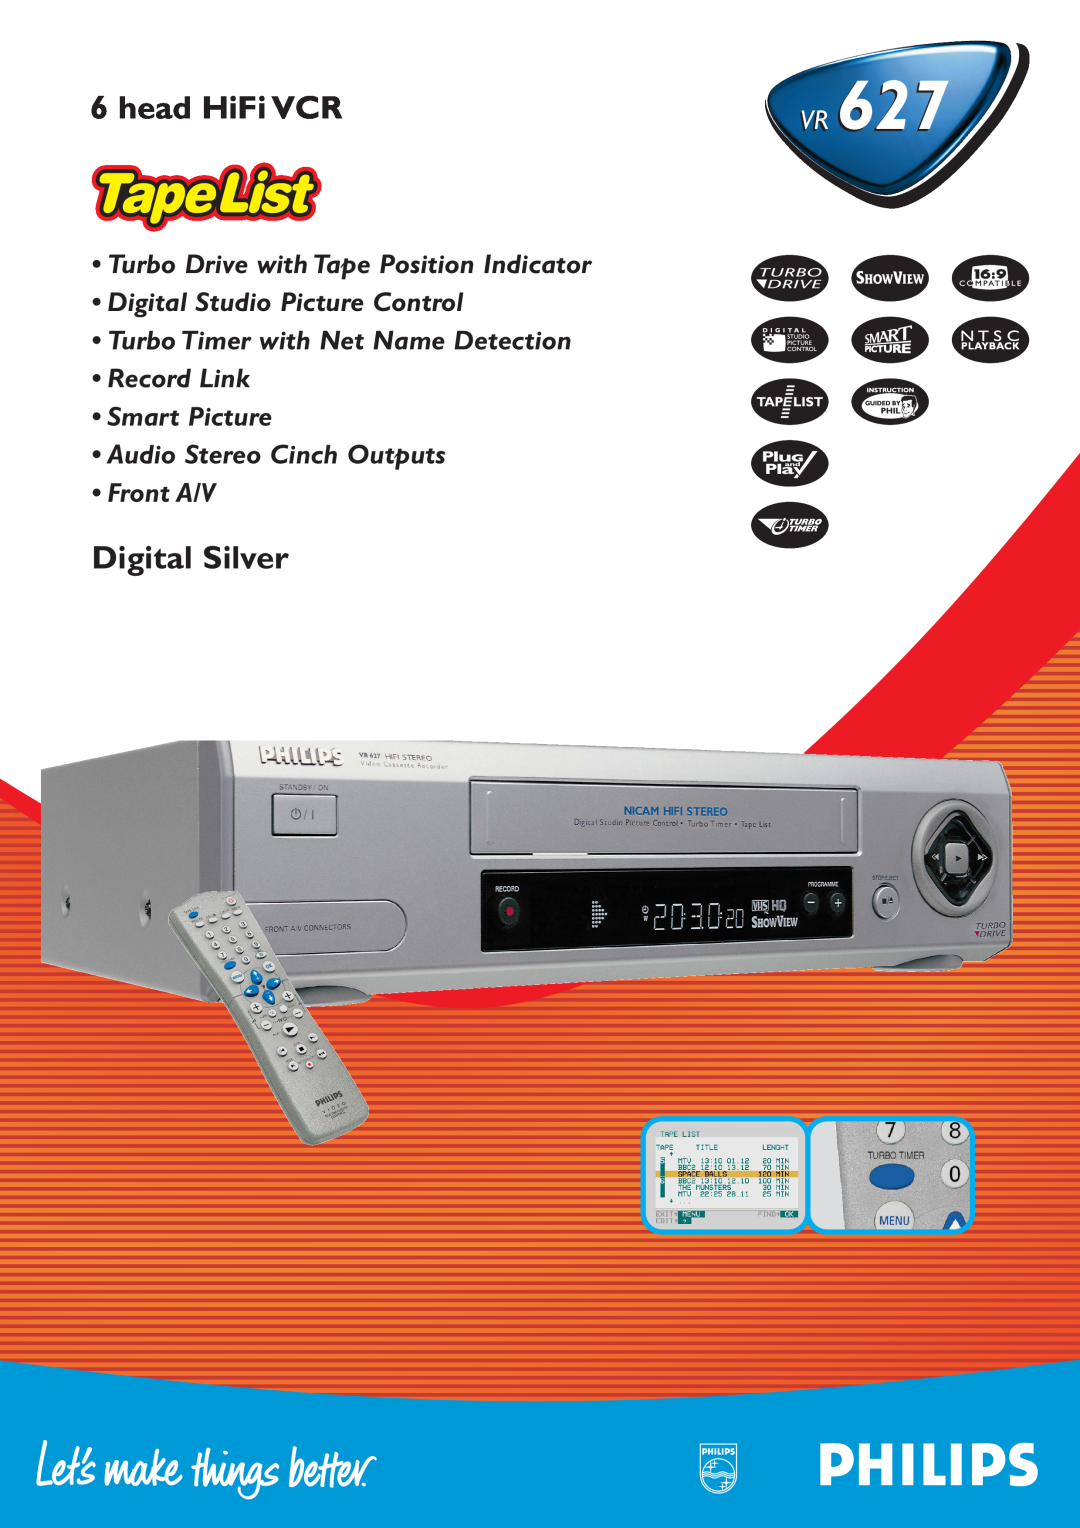 Philips VR627 manual Digital Silver, head HiFi VCR, Turbo Drive with Tape Position Indicator 